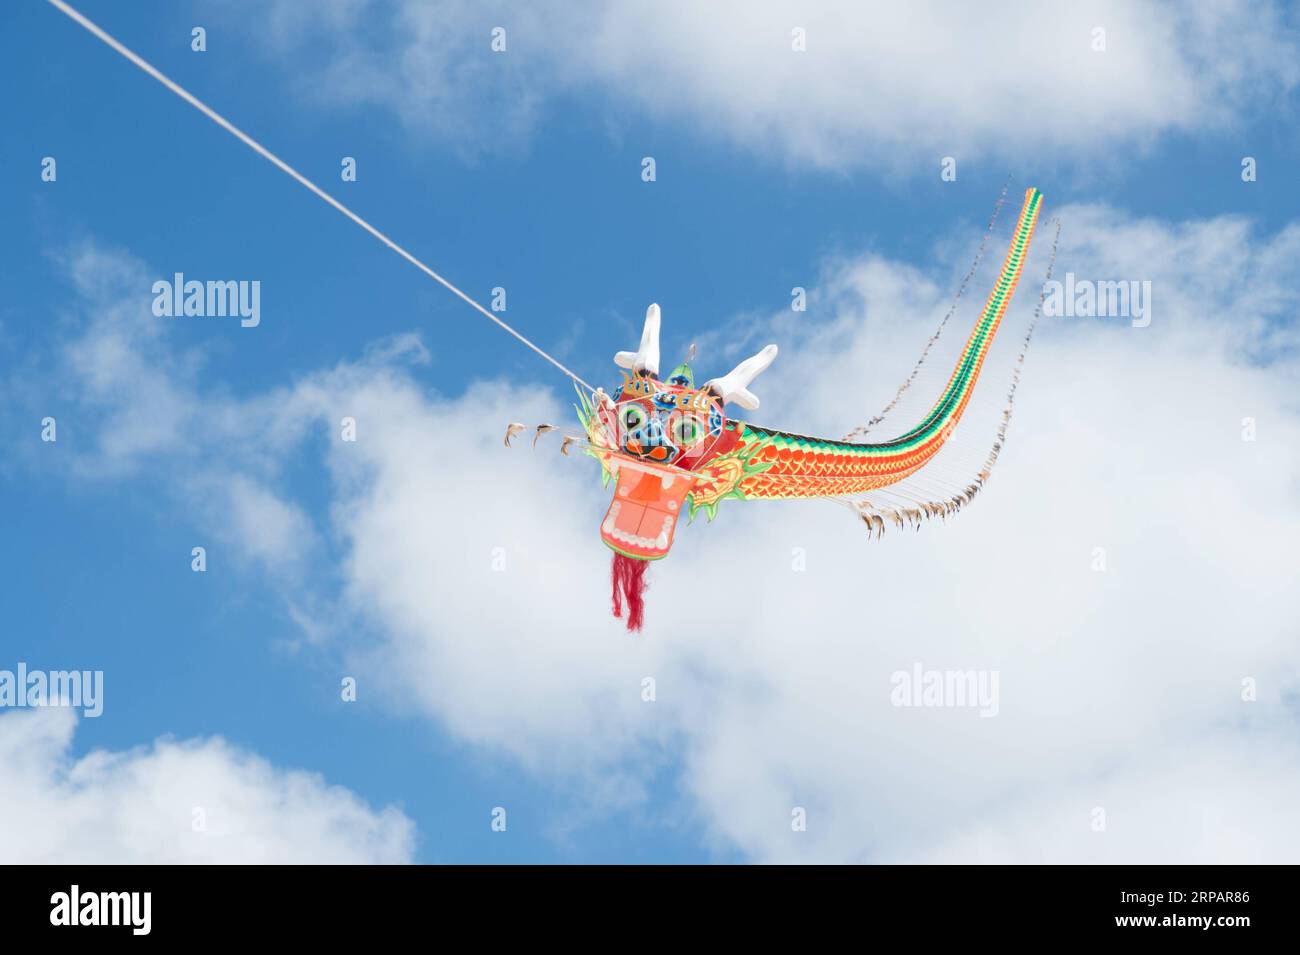 (190517) -- VALLETTA, May 17, 2019 (Xinhua) -- A dragon kite is seen flying in sky during the 2nd Chinese kite festival in Valleta, capital of Malta, on May 17, 2019. Colourful Chinese kites decorated the blue skies above the Maltese capital on Friday, attracting hundreds of children and visitors to the 2nd Chinese kite festival. (Xinhua/Yuan Yun) MALTA-VALLETTA-CHINESE KITE FESTIVAL PUBLICATIONxNOTxINxCHN Stock Photo